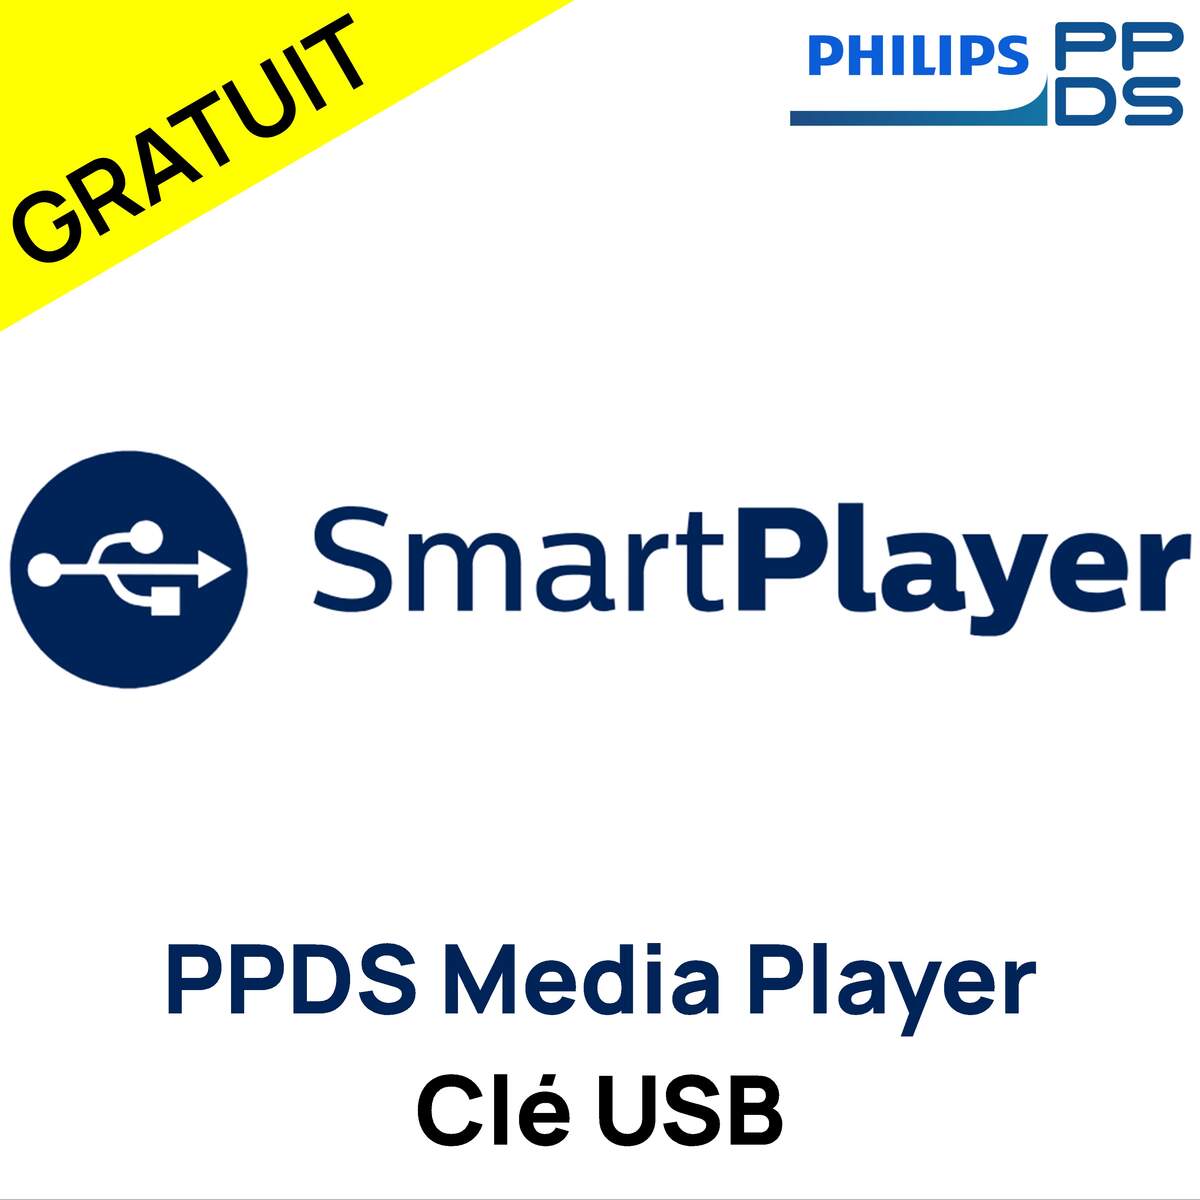 Philips PPDS SmartPlayer image